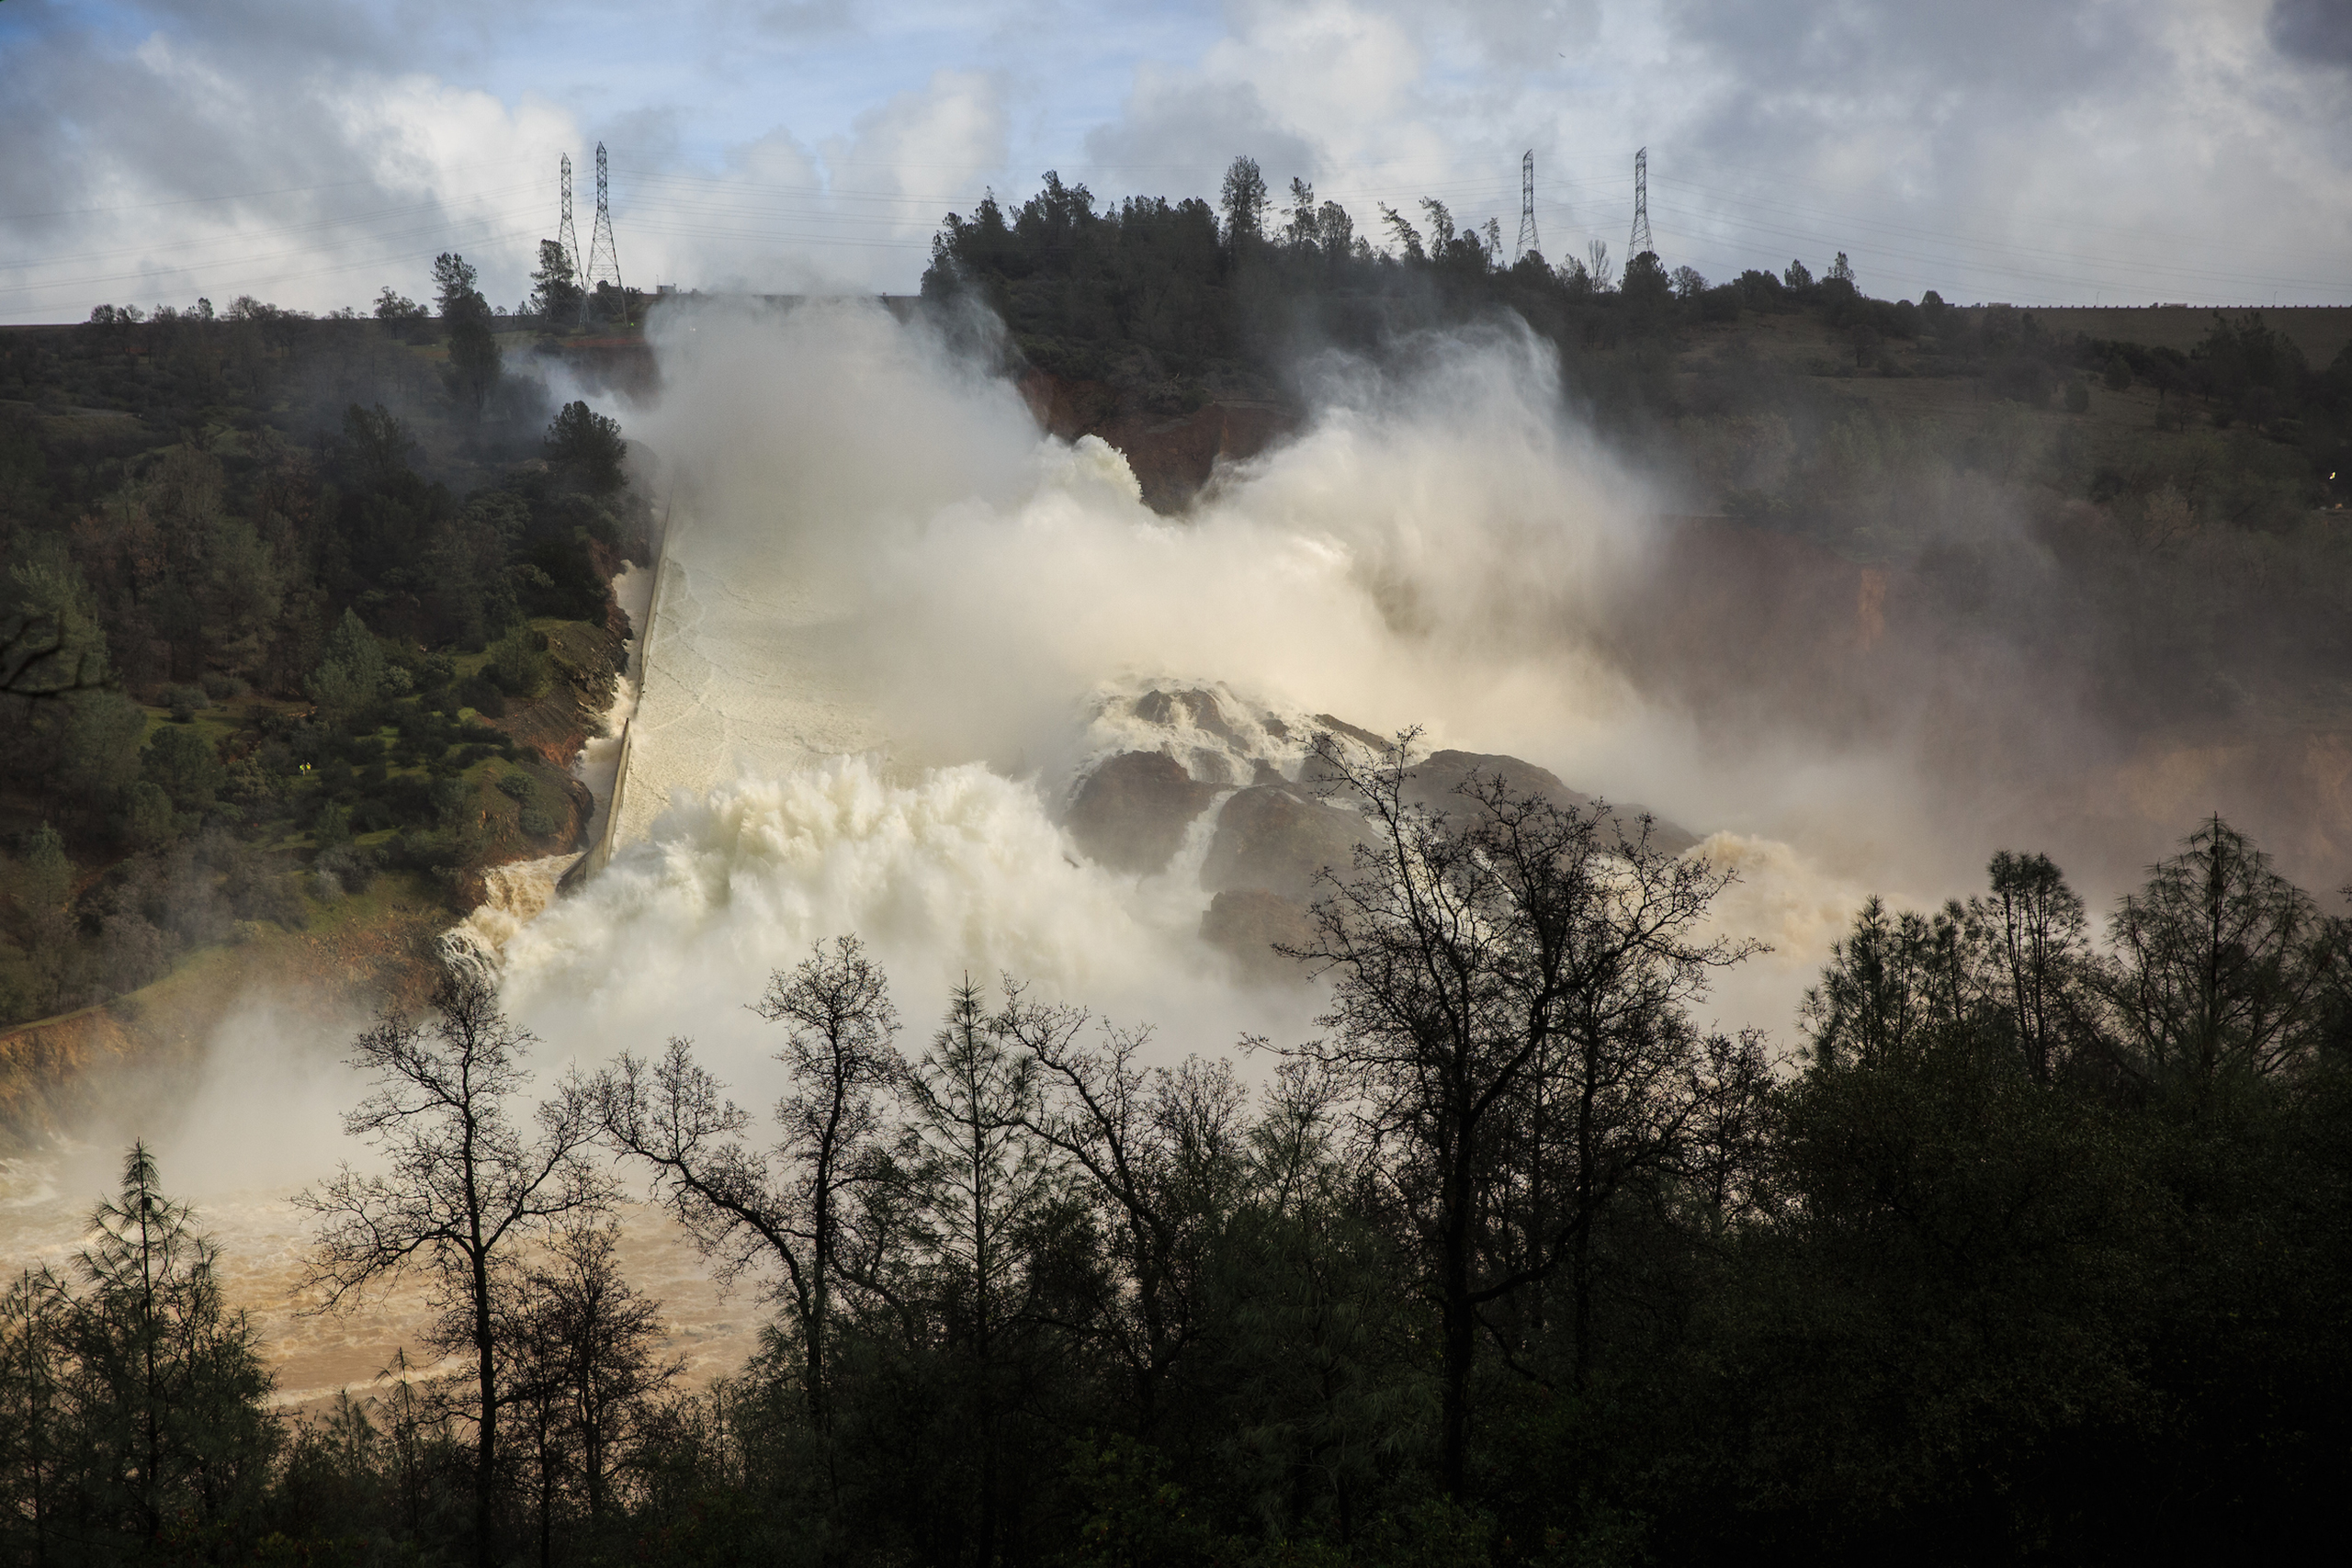 65,000 cfs of water flows through a damaged spillway on the Oroville Dam in Oroville, Calif., on Feb. 10, 2017.